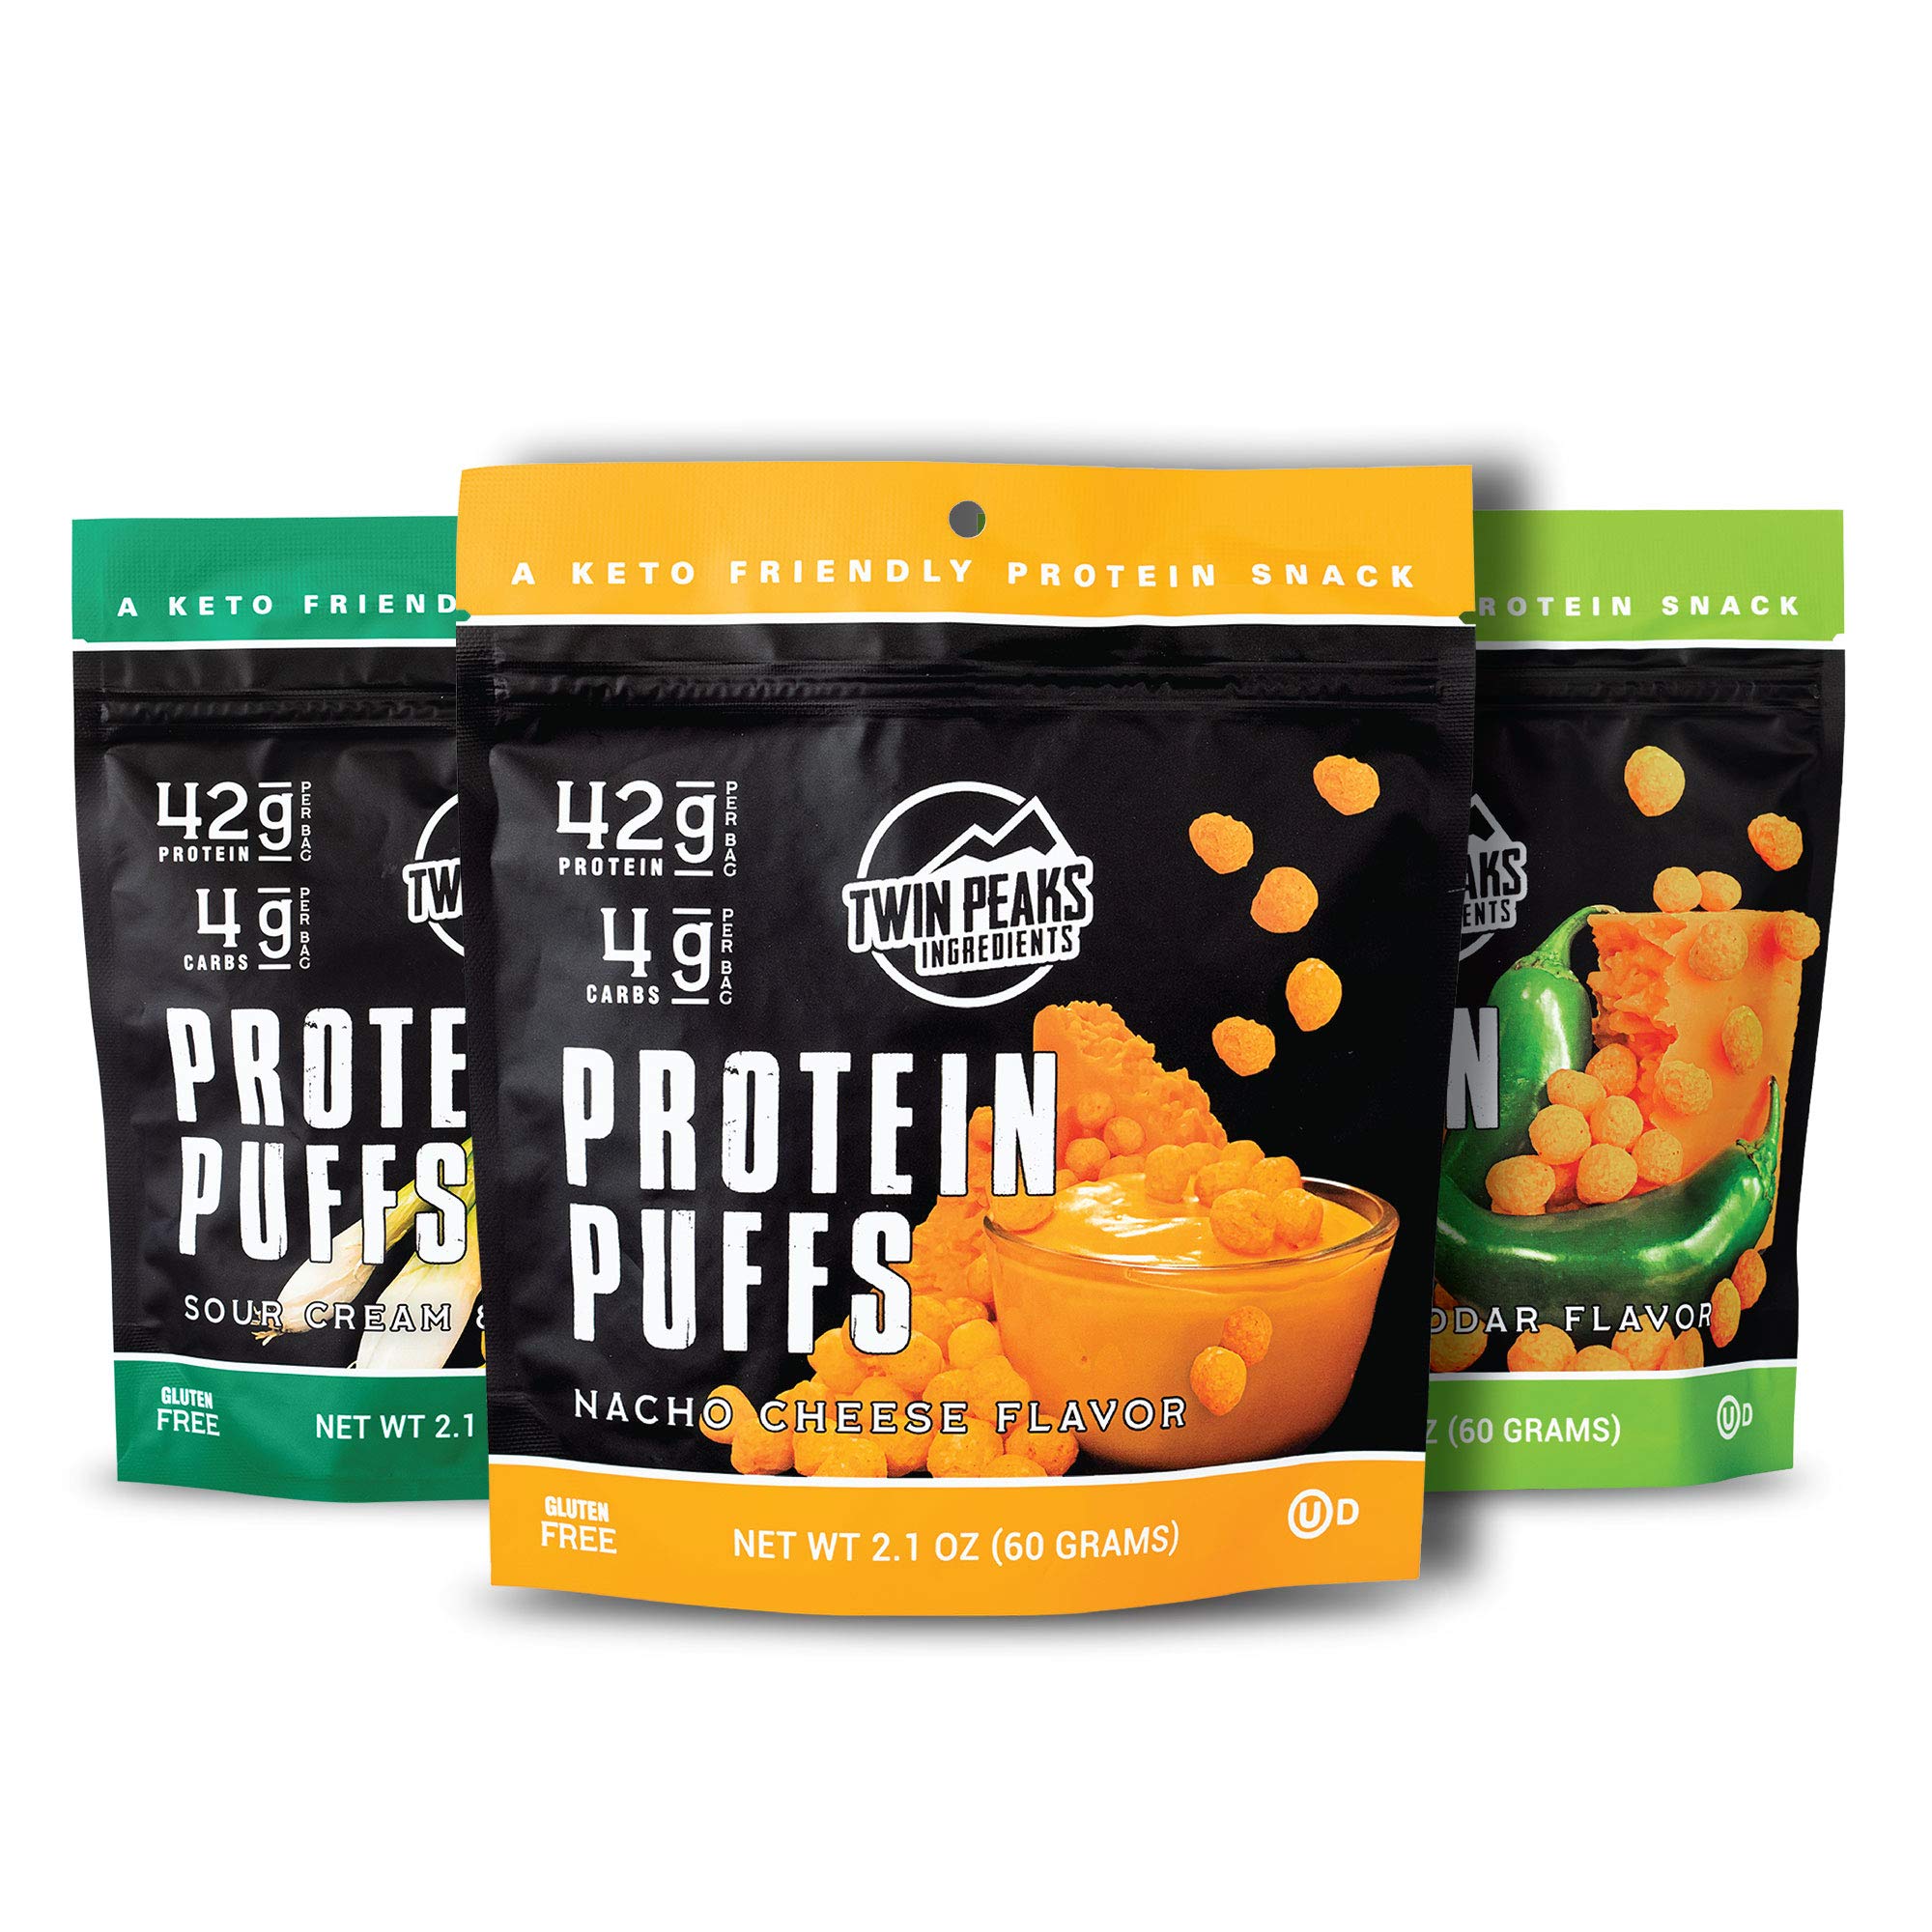 Twin Peaks Low Carb, Keto Friendly Protein Puffs, 3 Bags of Assorted Flavor Puffs + 1 Jug Nacho Cheese Flavor Puffs